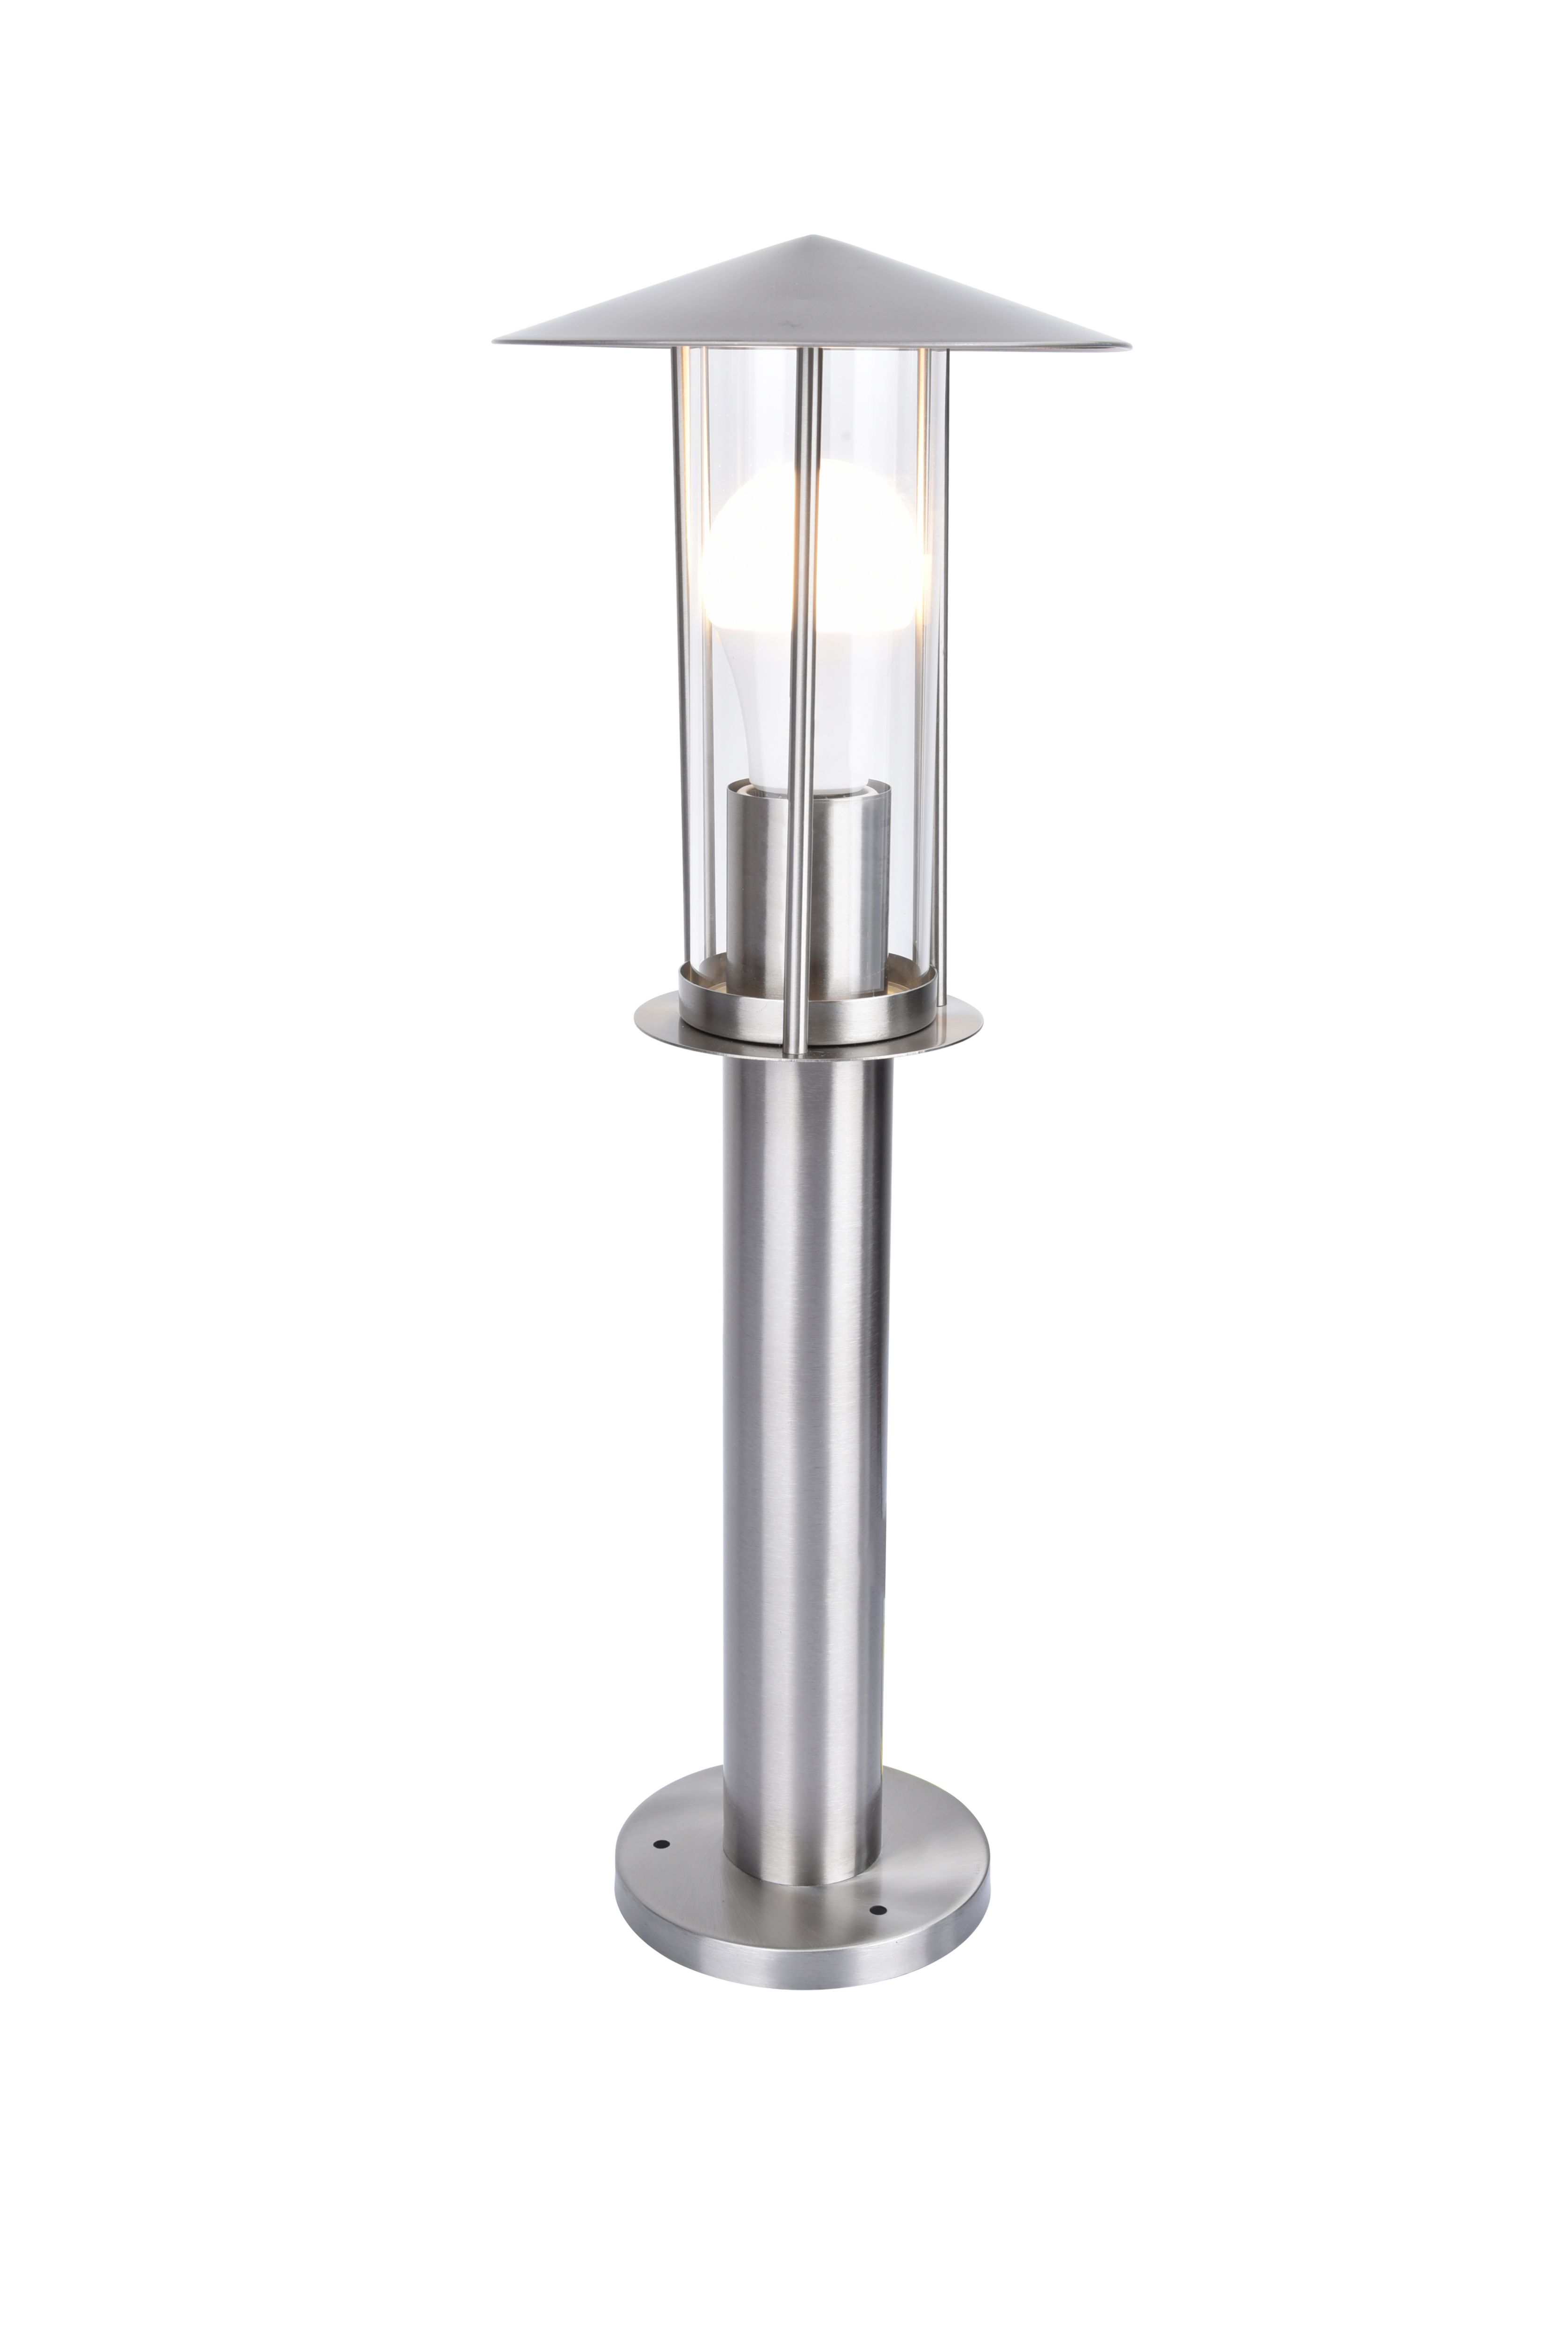 GoodHome Chignik Lantern Stainless steel Mains-powered 1 lamp Outdoor Post light (H)500mm